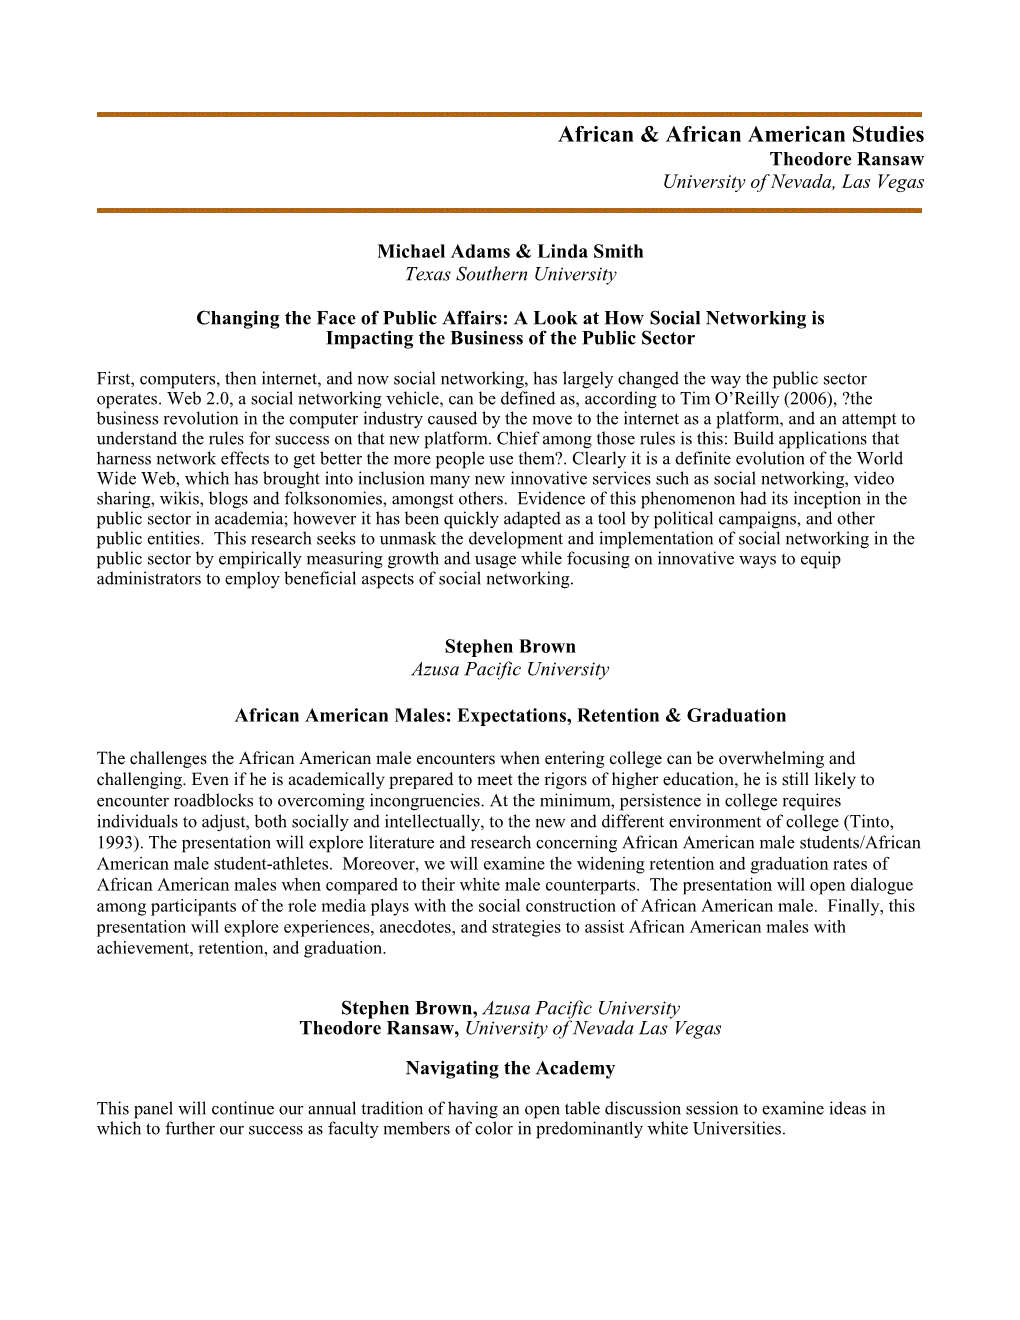 2009 Conference Abstracts